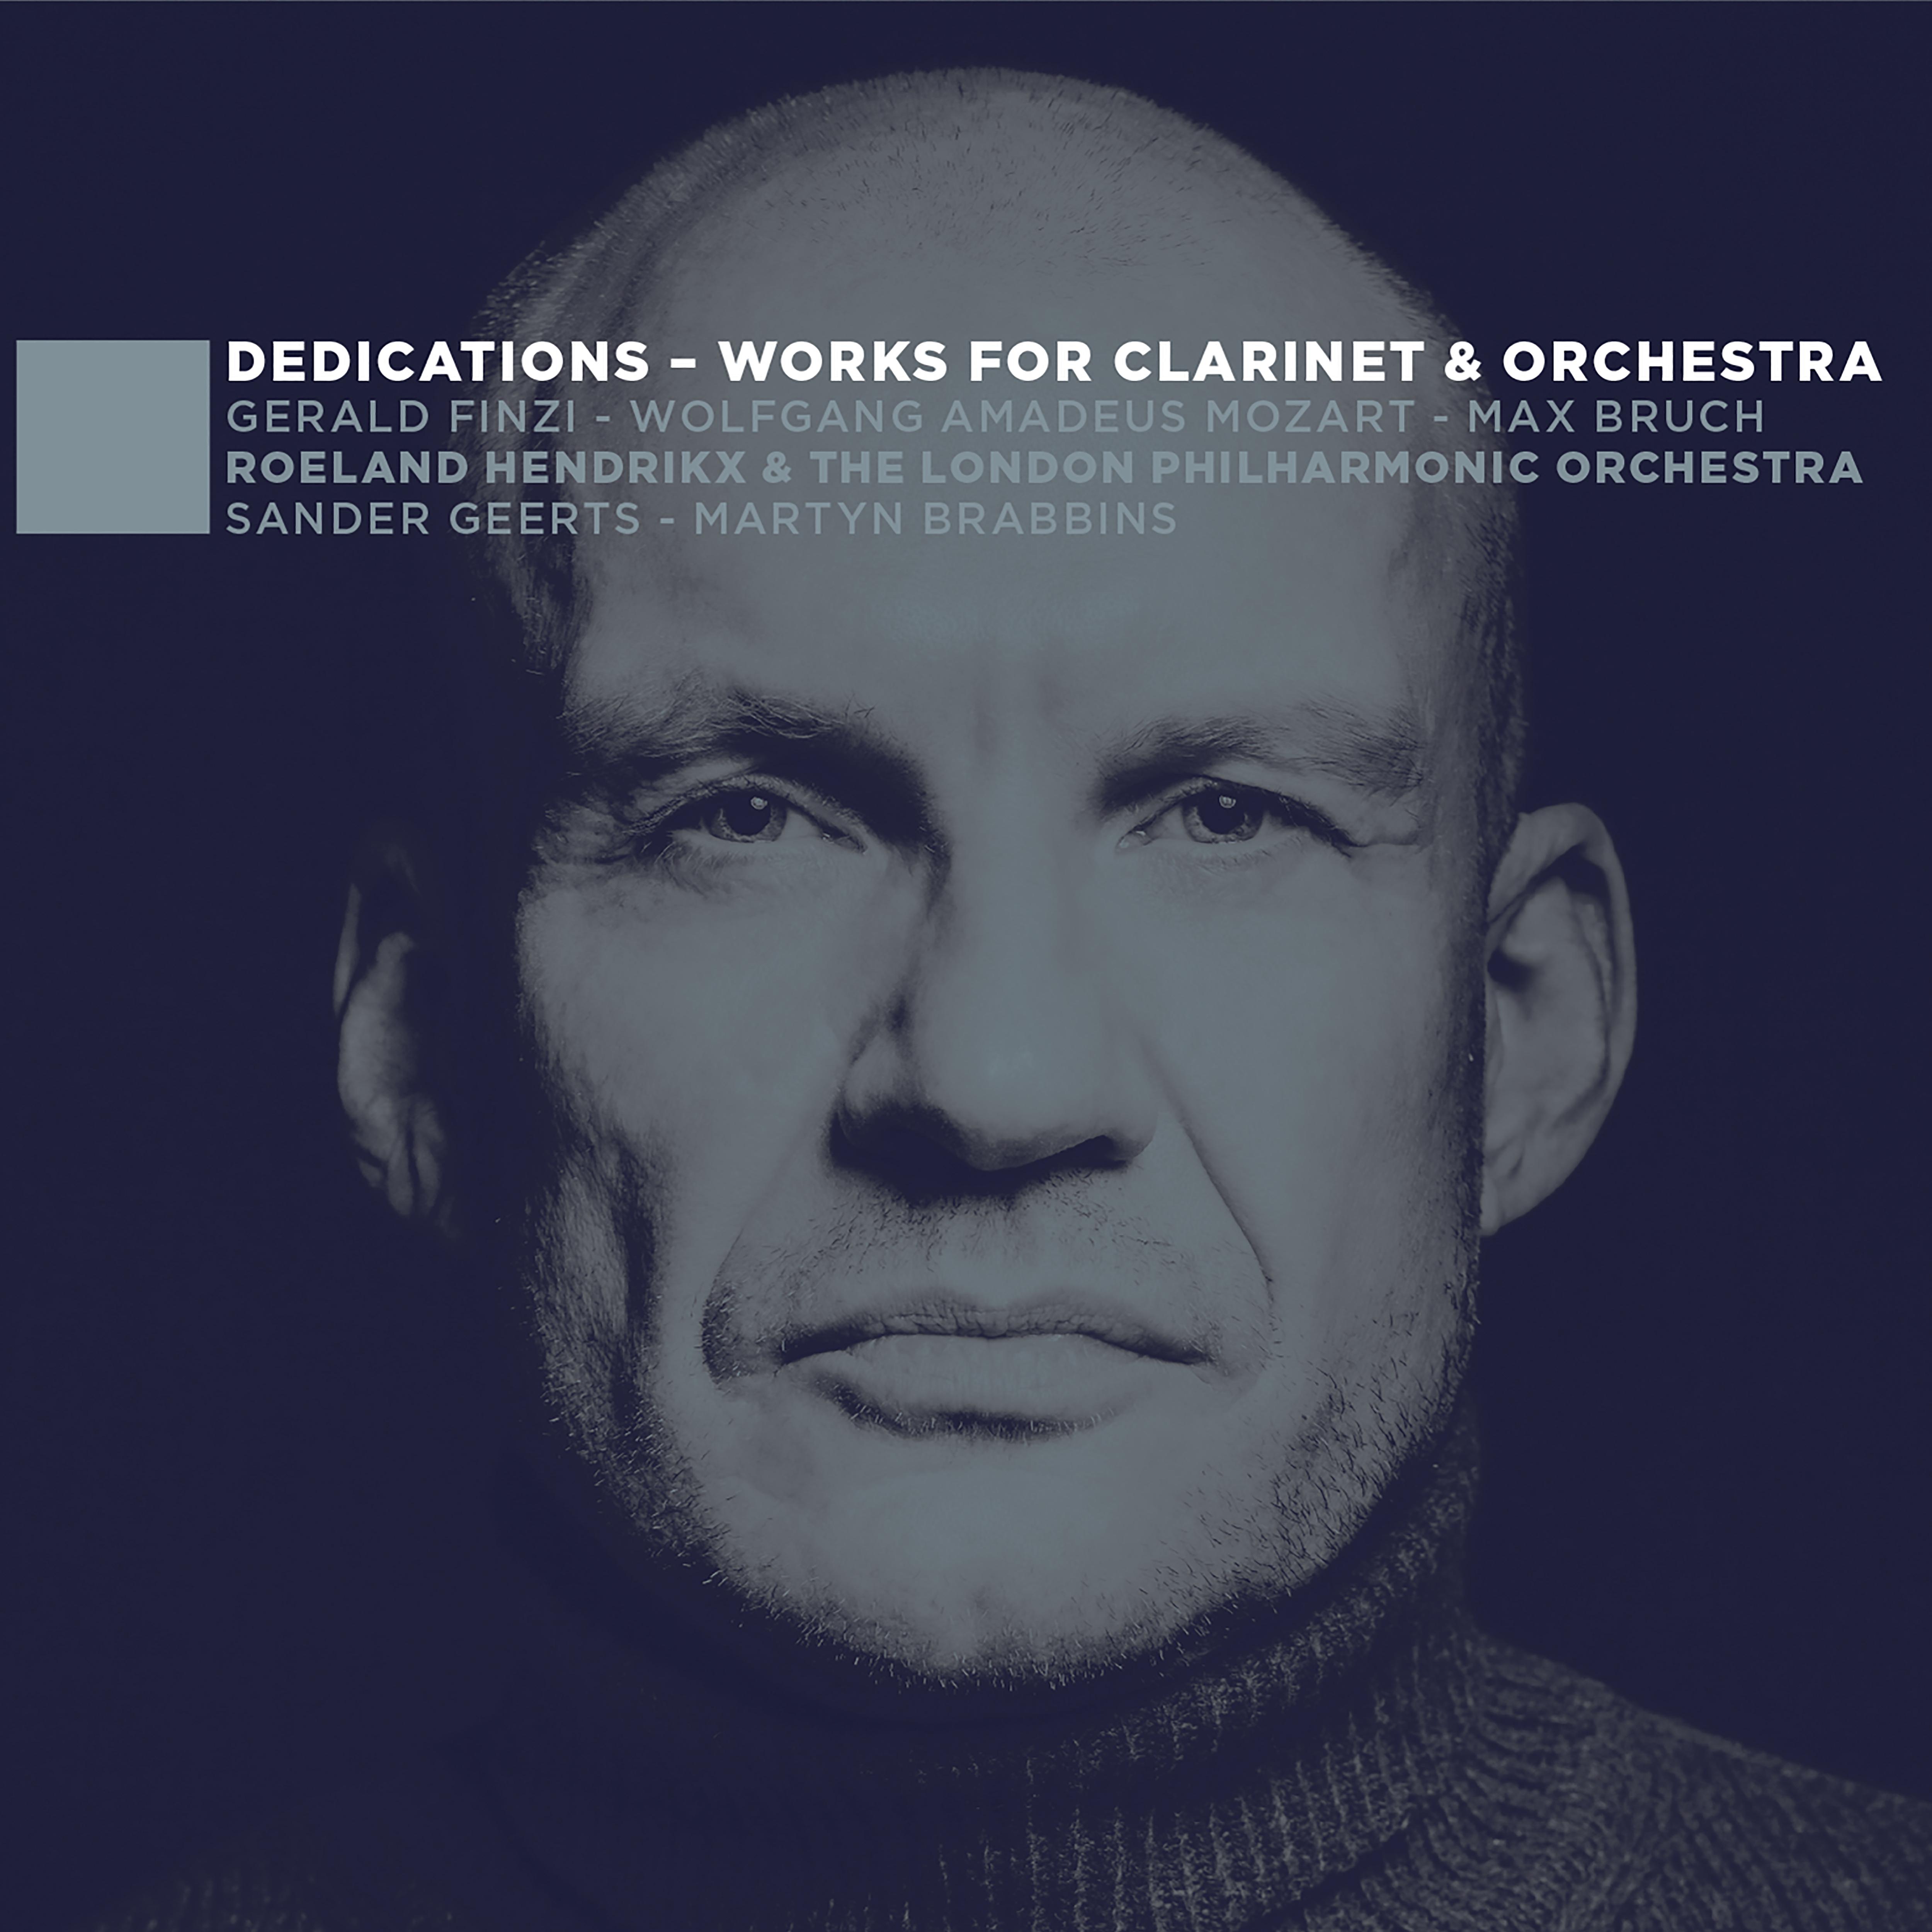 Double Concerto for Clarinet and Viola with Orchestra, Op. 88: II. Allegro moderato